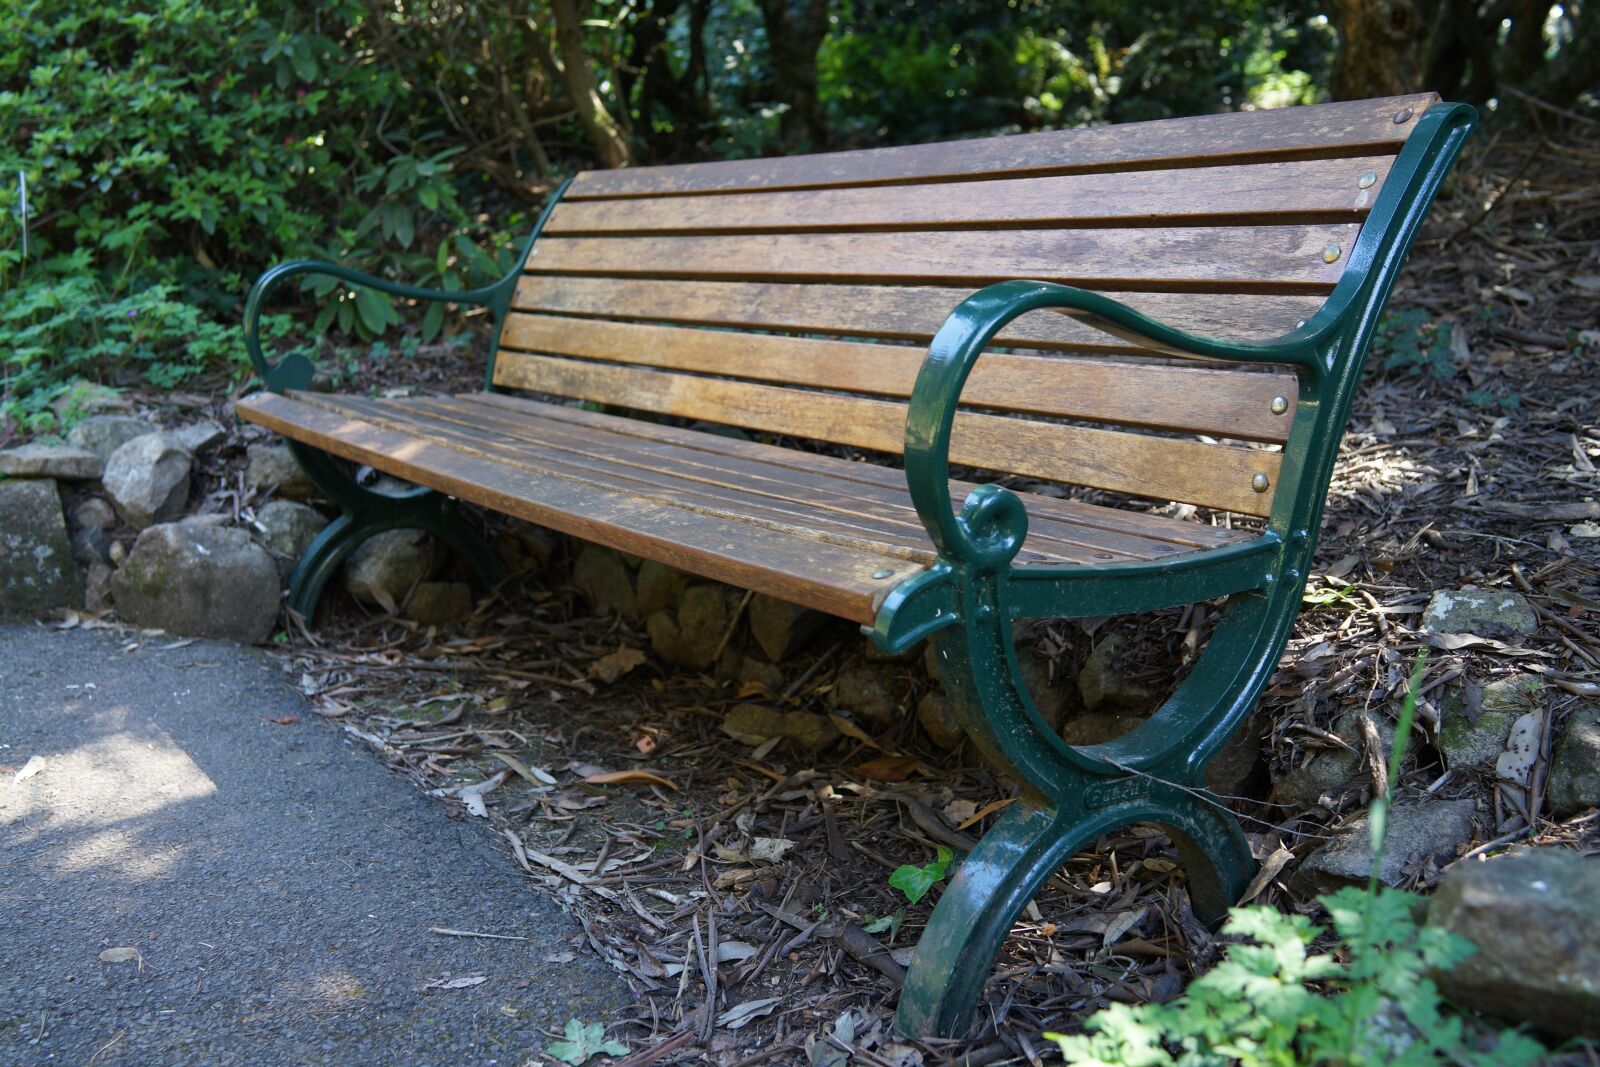 Sony Cyber-shot DSC-RX1R sample photo. Bench, public seating, national photography